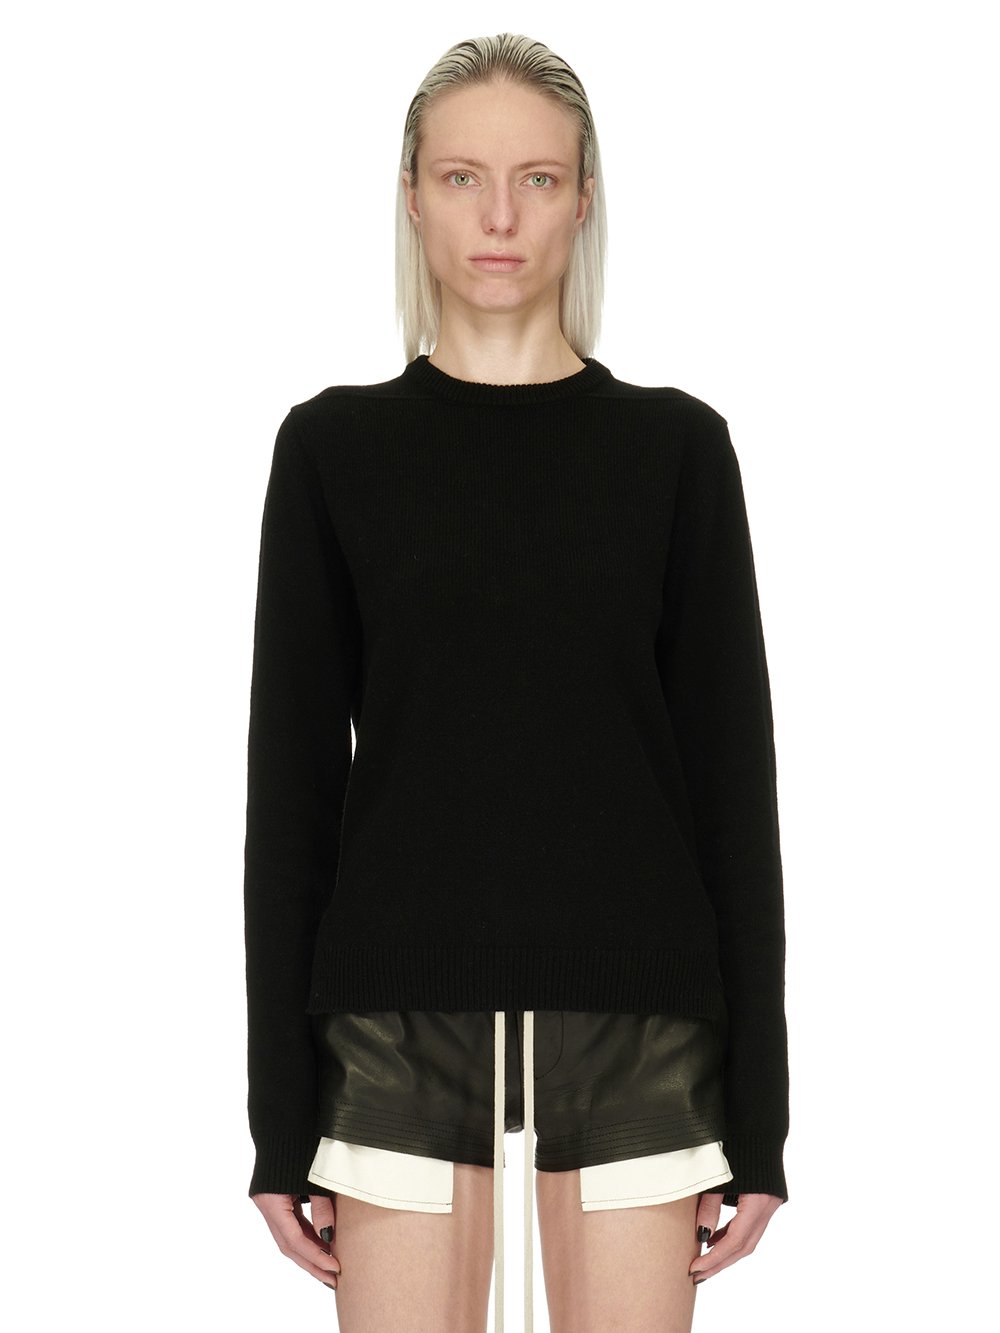 RICK OWENS FW23 LUXOR ROUND NECK IN BLACK RECYCLED CASHMERE KNIT